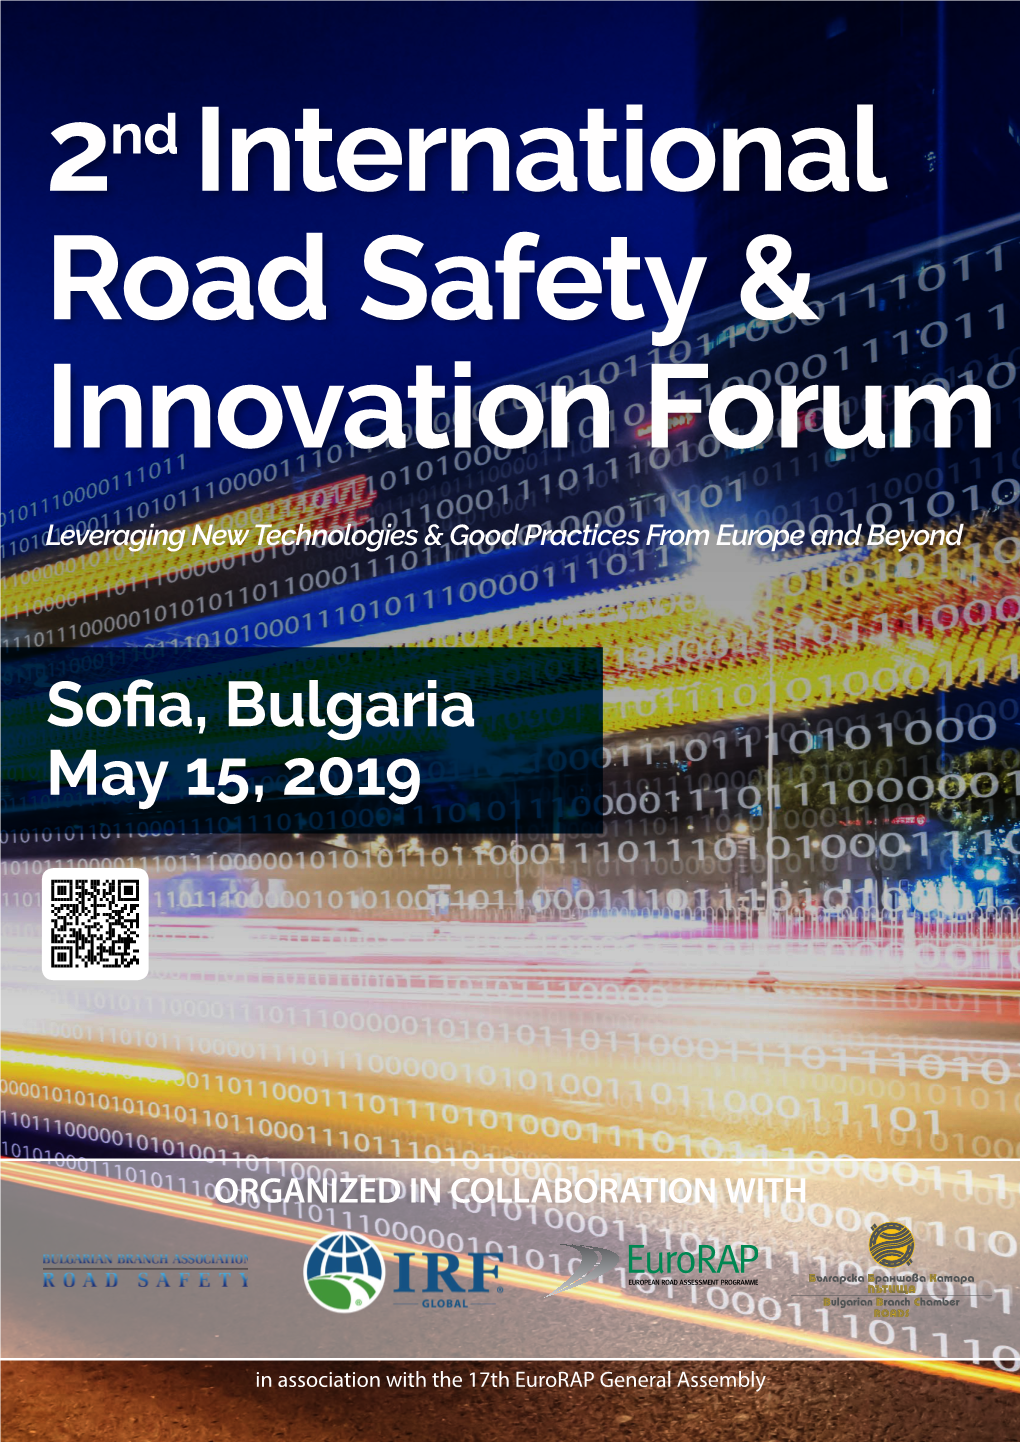 2 Nd Road Safety & Innovation Forum